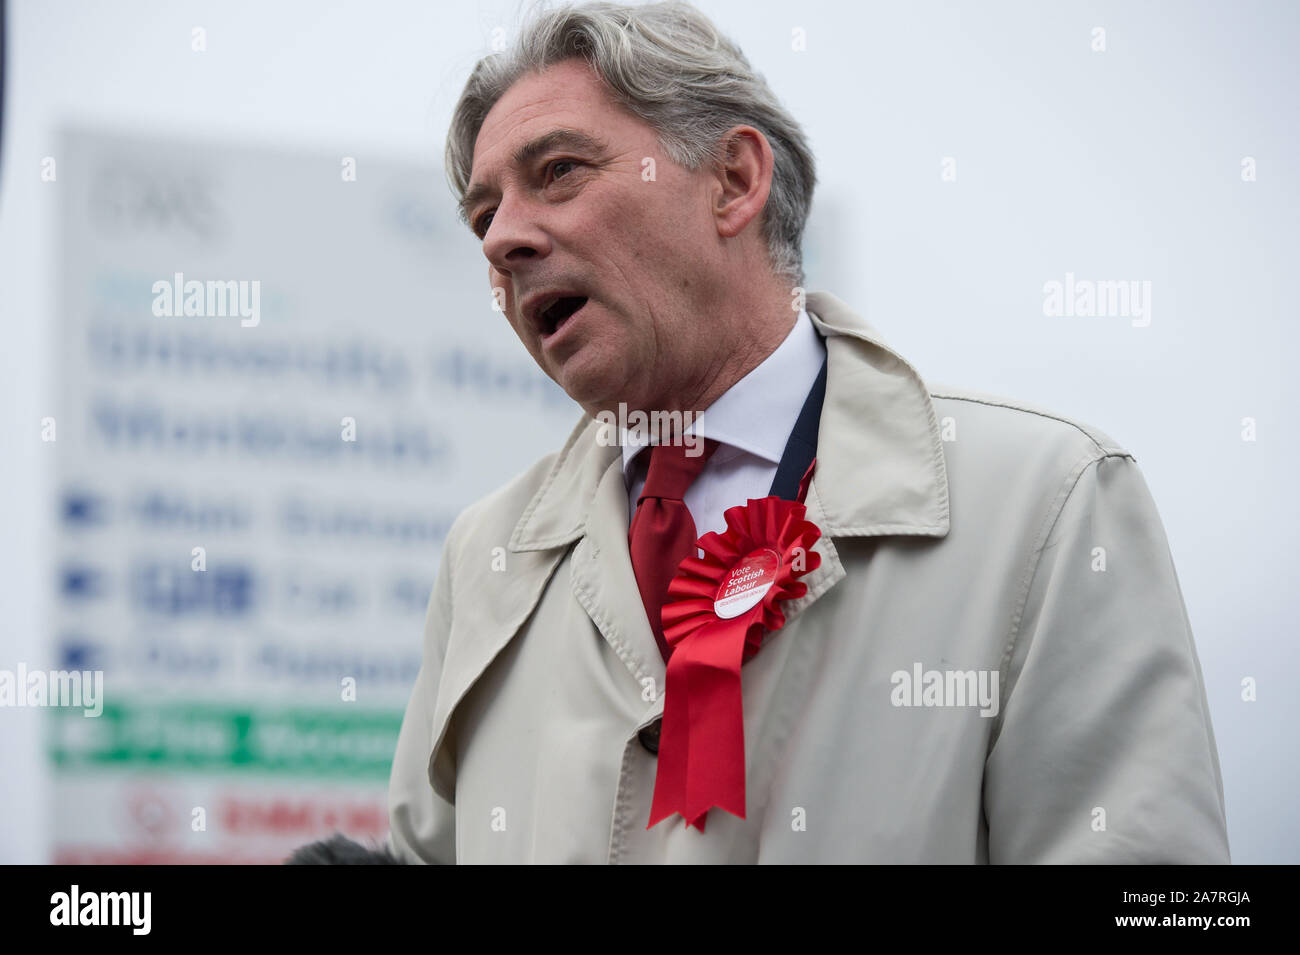 Glasgow, UK. 4 November 2019. Pictured: Richard Leonard MSP - Leader of the Scottish Labour Party.  Scottish Labour leader Richard Leonard joins Helen McFarlane, candidate for the Airdrie and Shotts constituency, at Monklands Hospital to highlight the SNP’s broken promises on the NHS. Credit: Colin Fisher/Alamy Live News Stock Photo